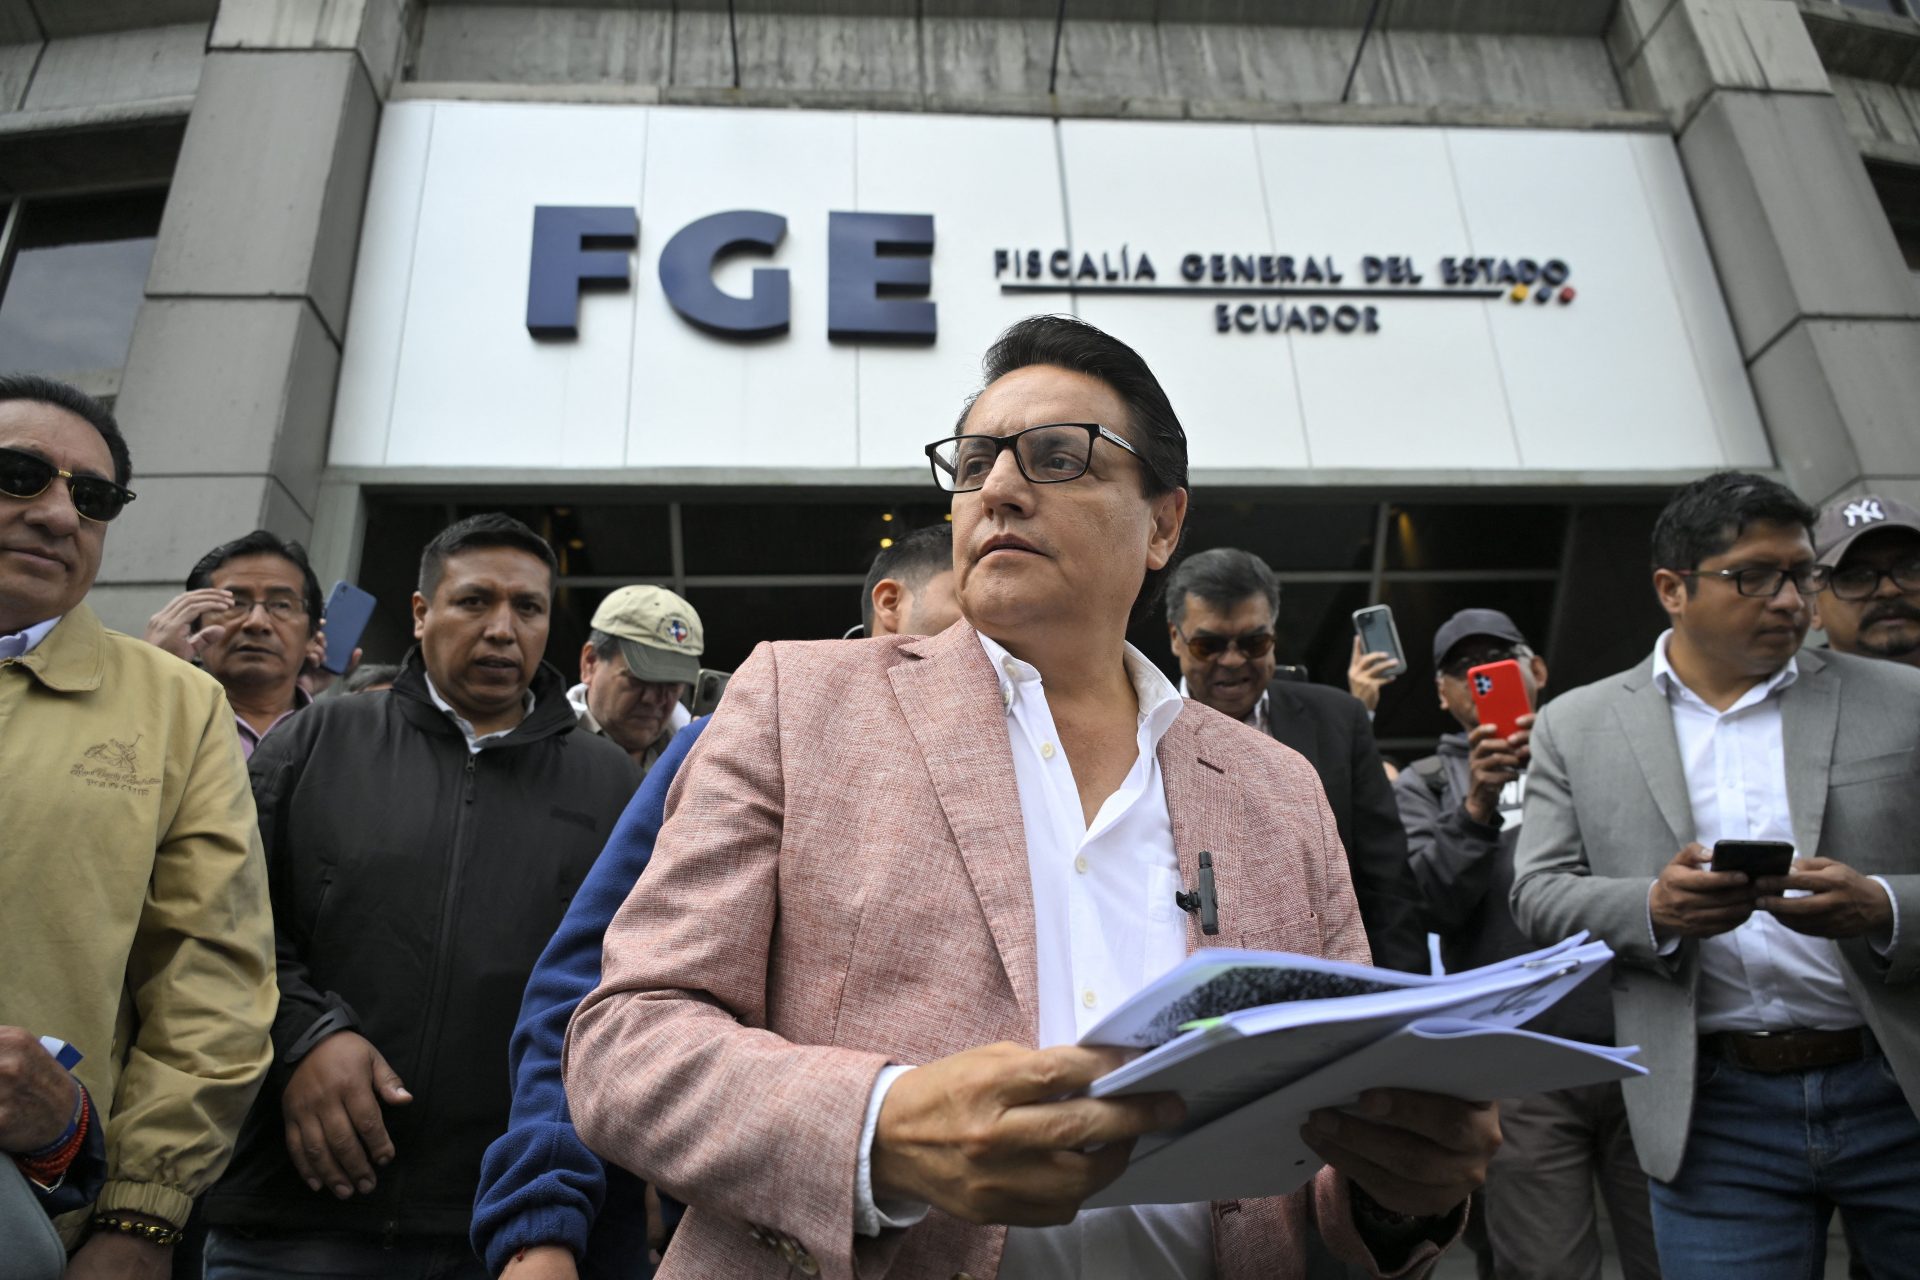 Ecuador's anti-corruption presidential candidate was just assassinated